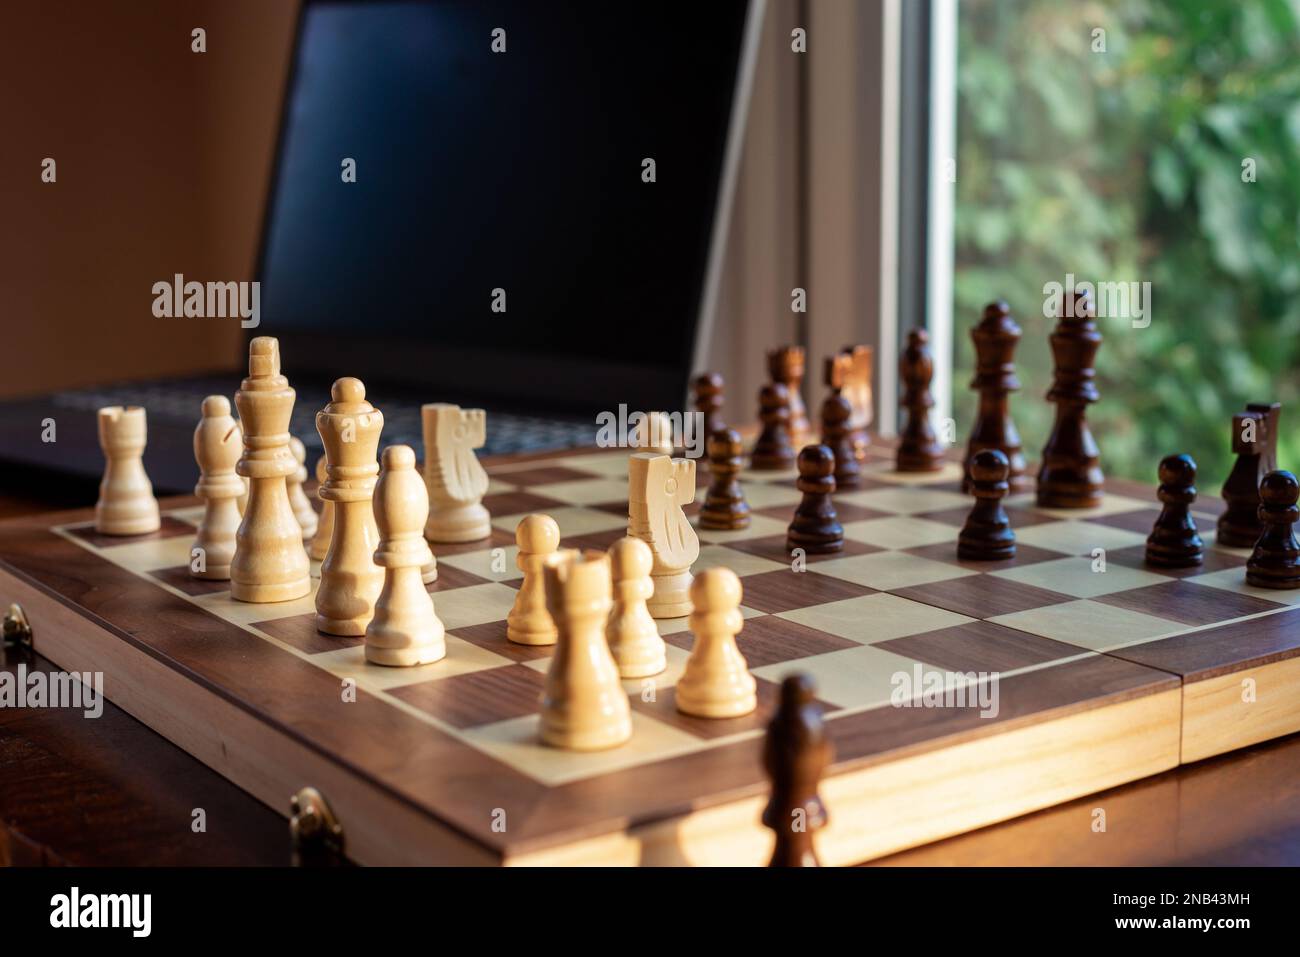 Premium Photo  Playing chess online studying how to play chess